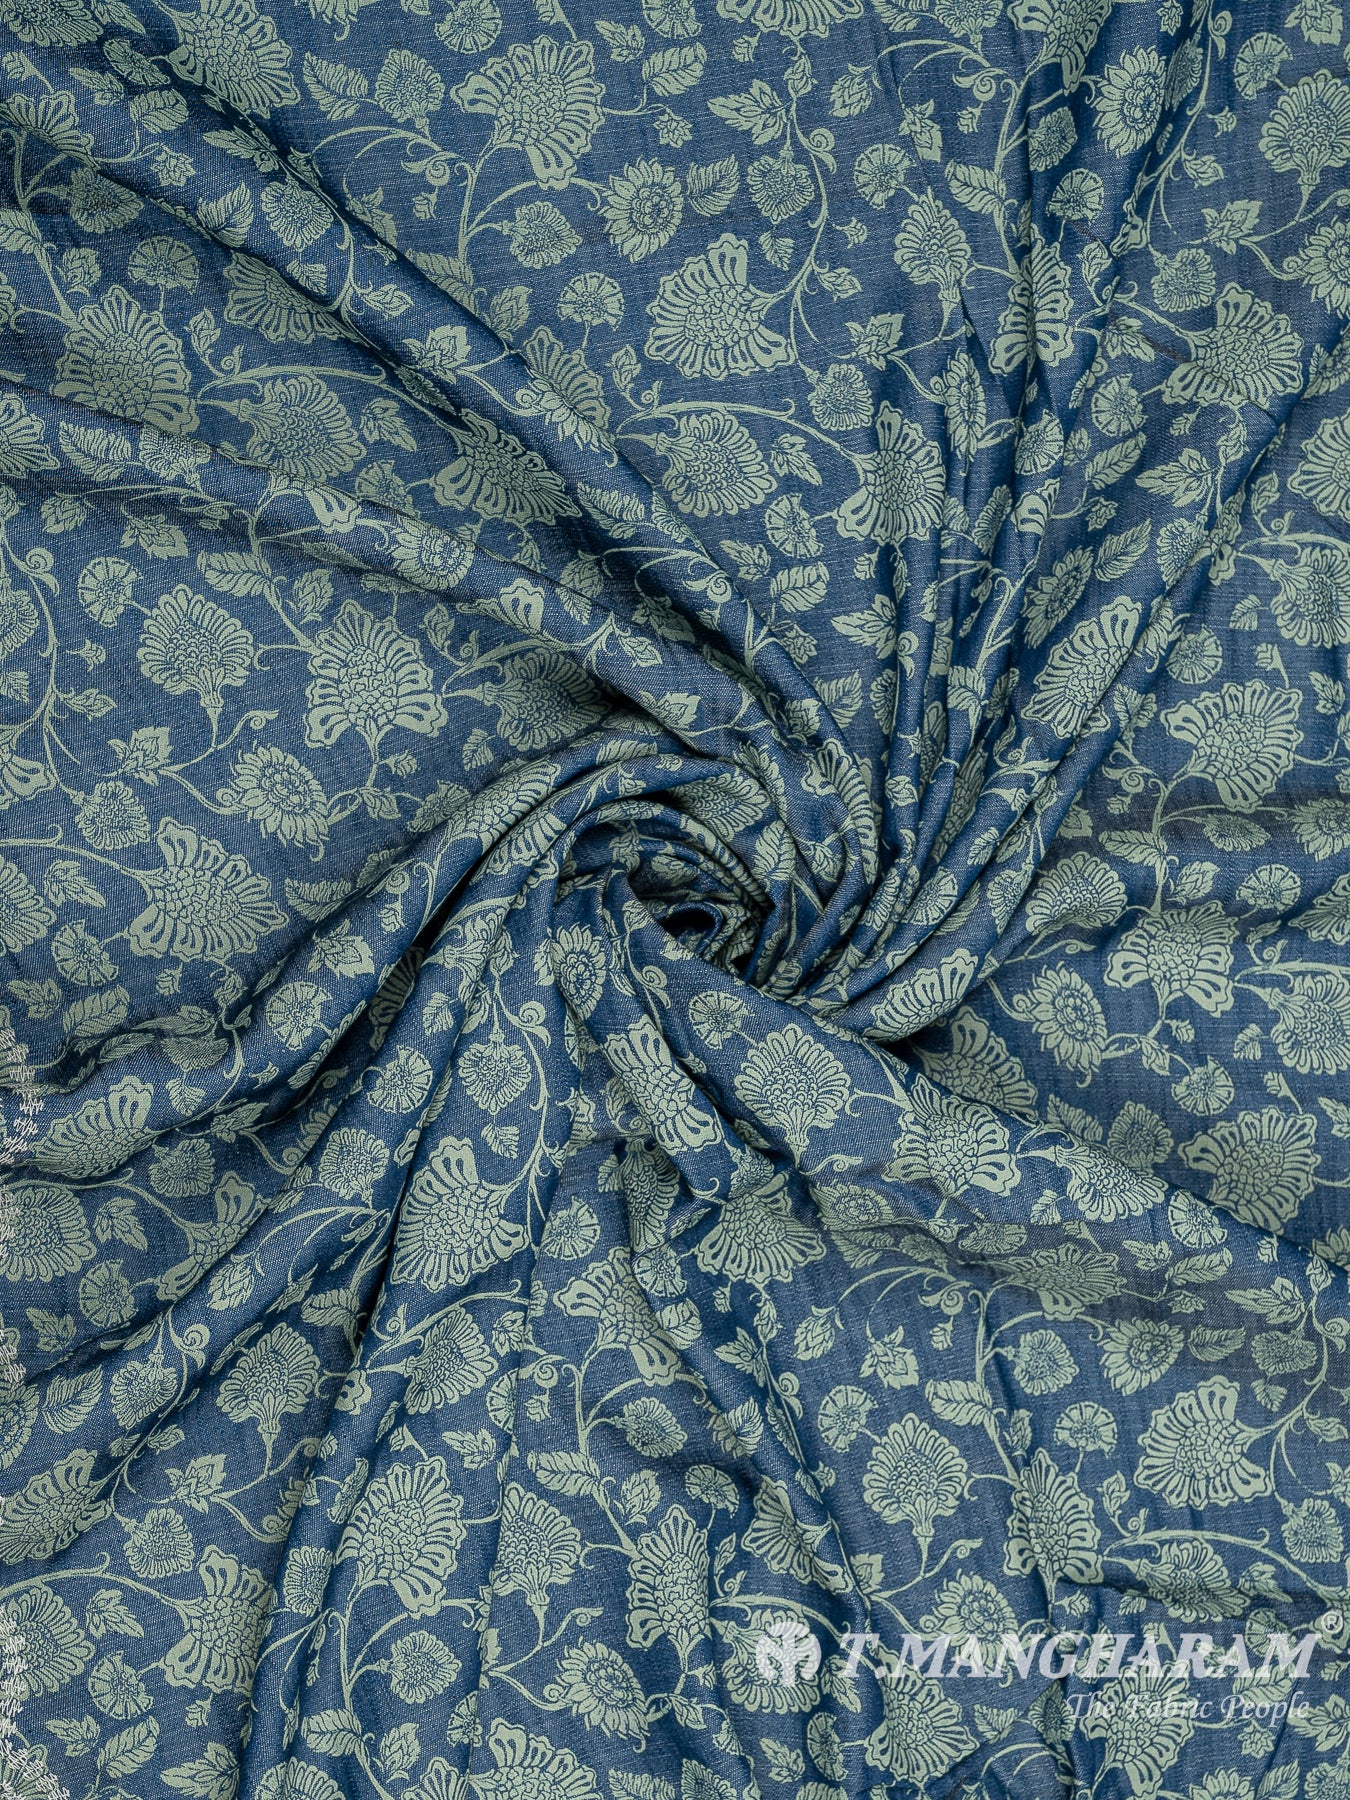 Blue Denim Embroidery Fabric - EB6573 view-1